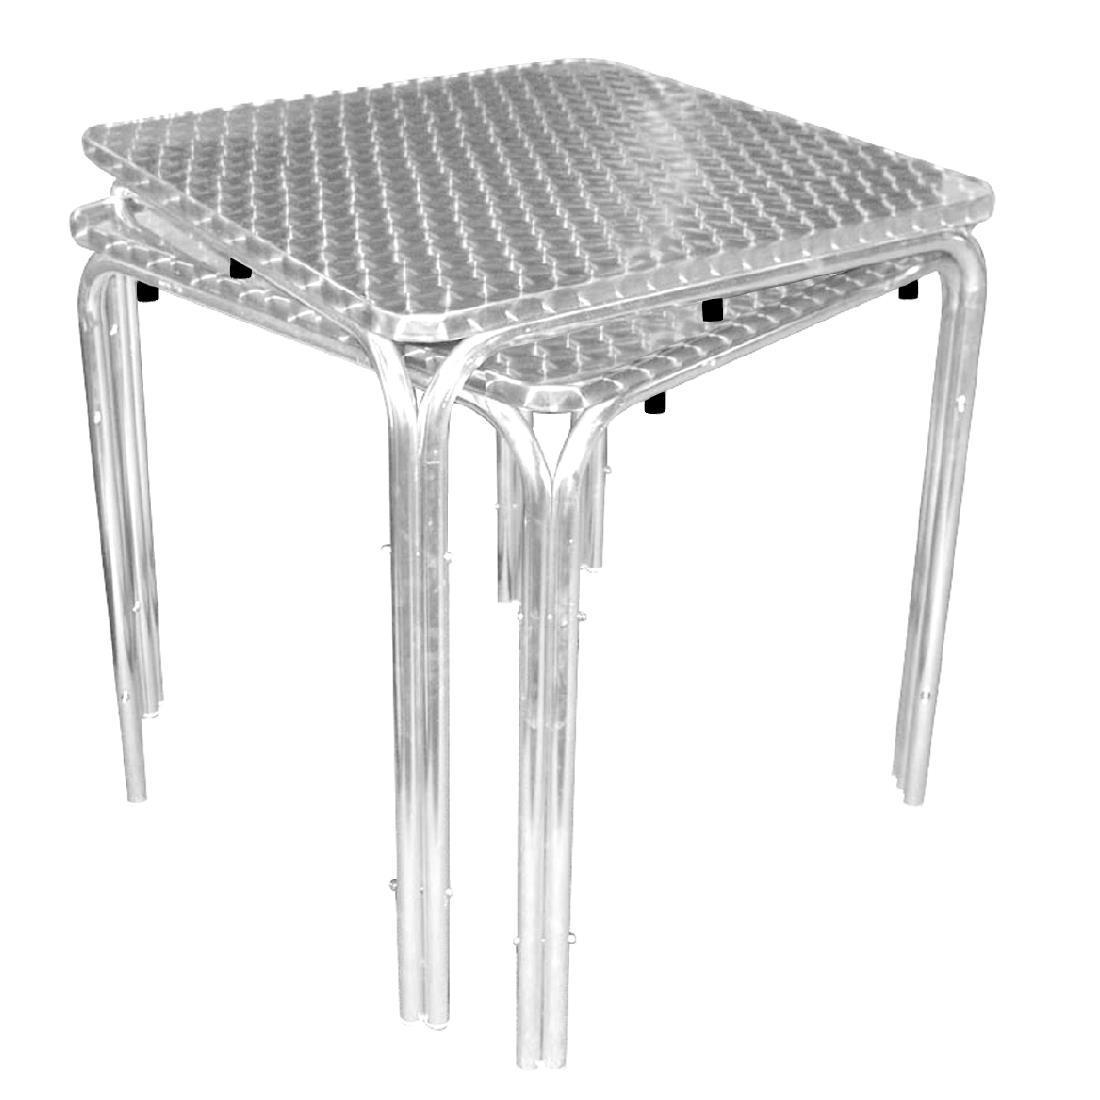 Bolero Square Stacking Table Stainless Steel 700mm - U505  - 4